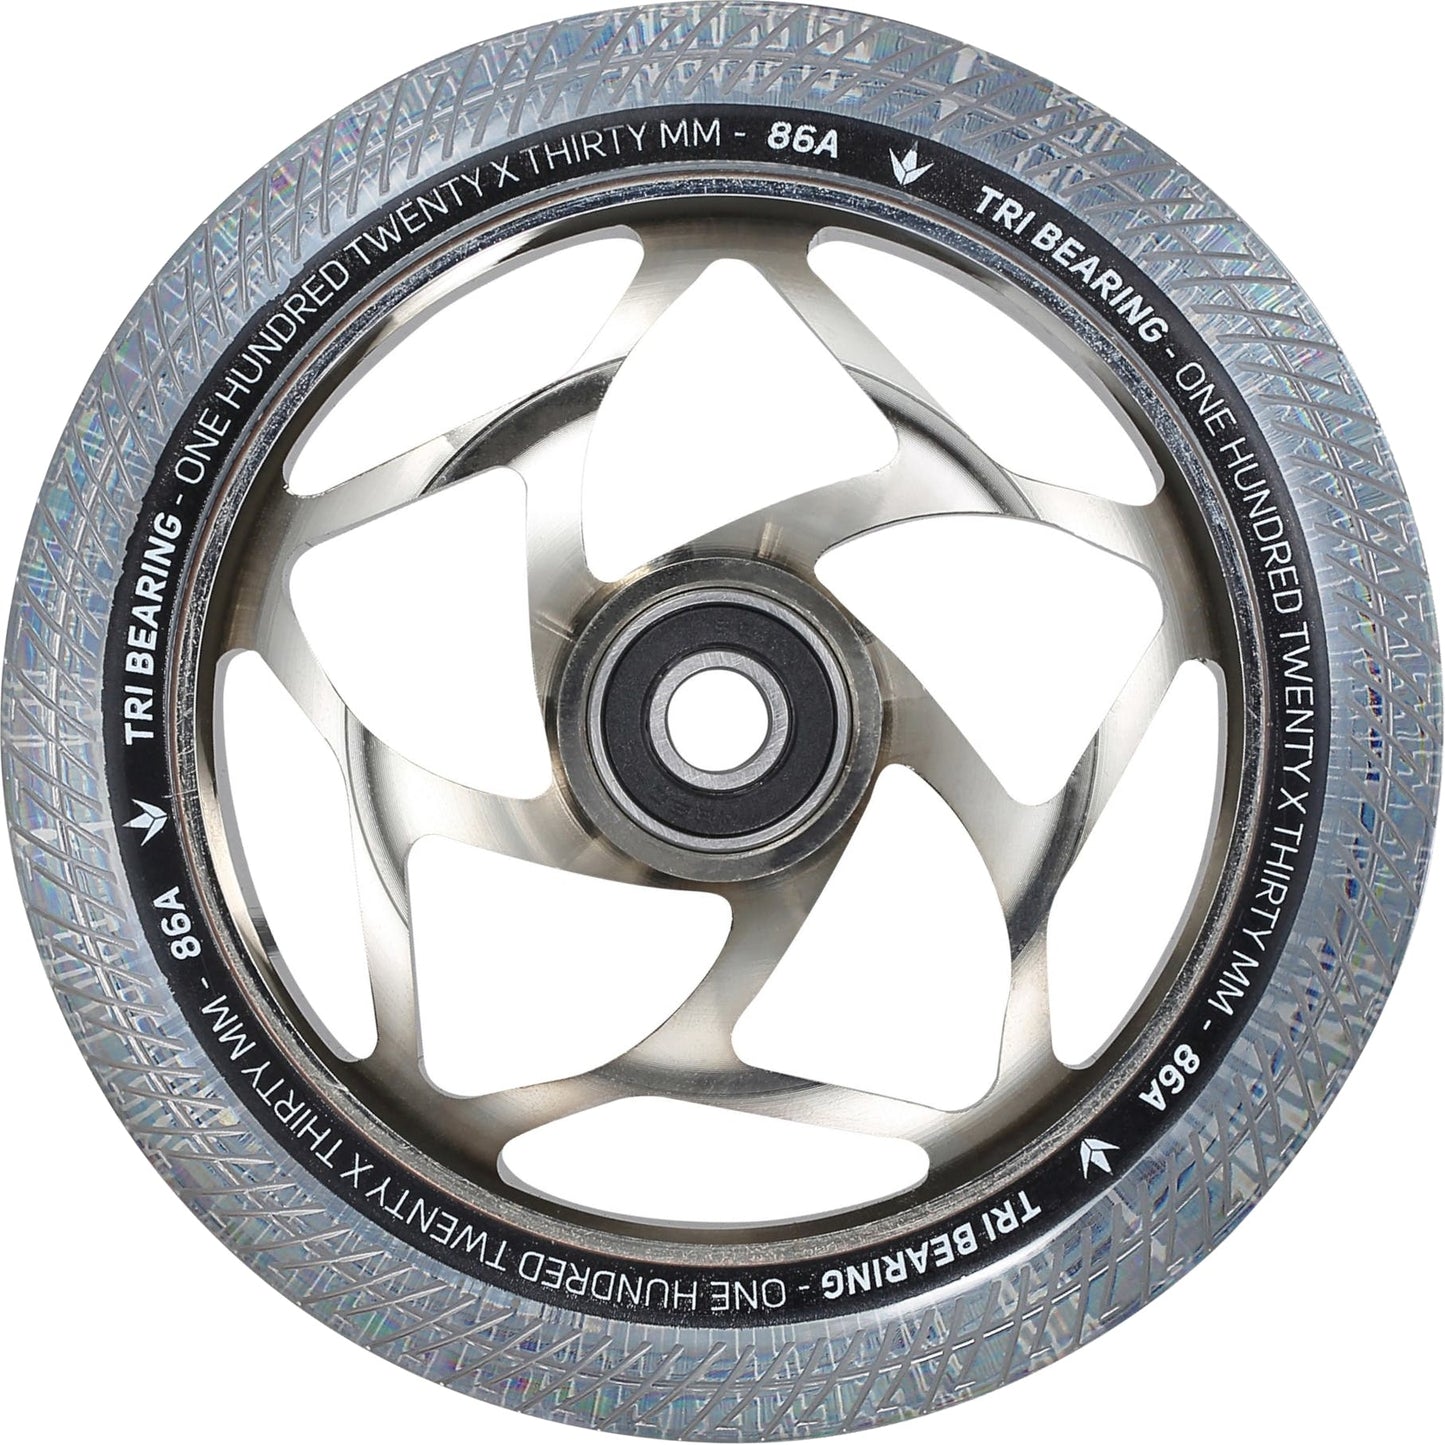 Blunt Envy Tri-Bearing 120mm X 30mm Scooter Wheel - Chrome / Clear